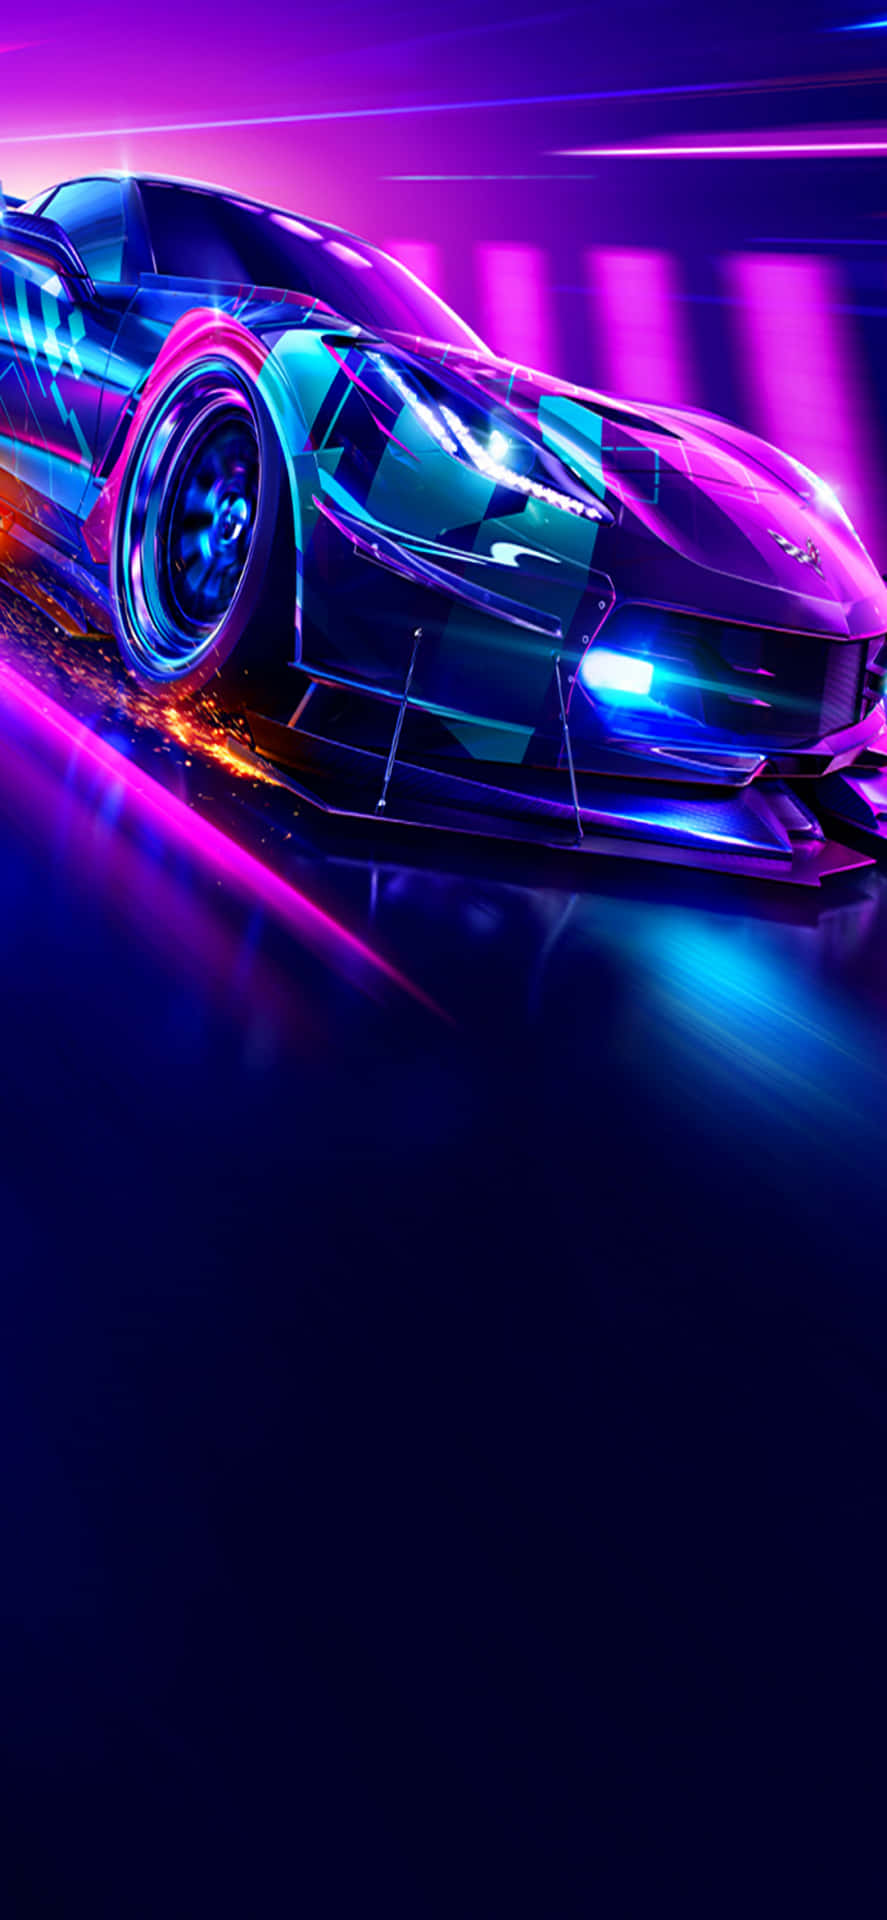 Need for Speed Heat ignites the racing scene on iPhone Xs